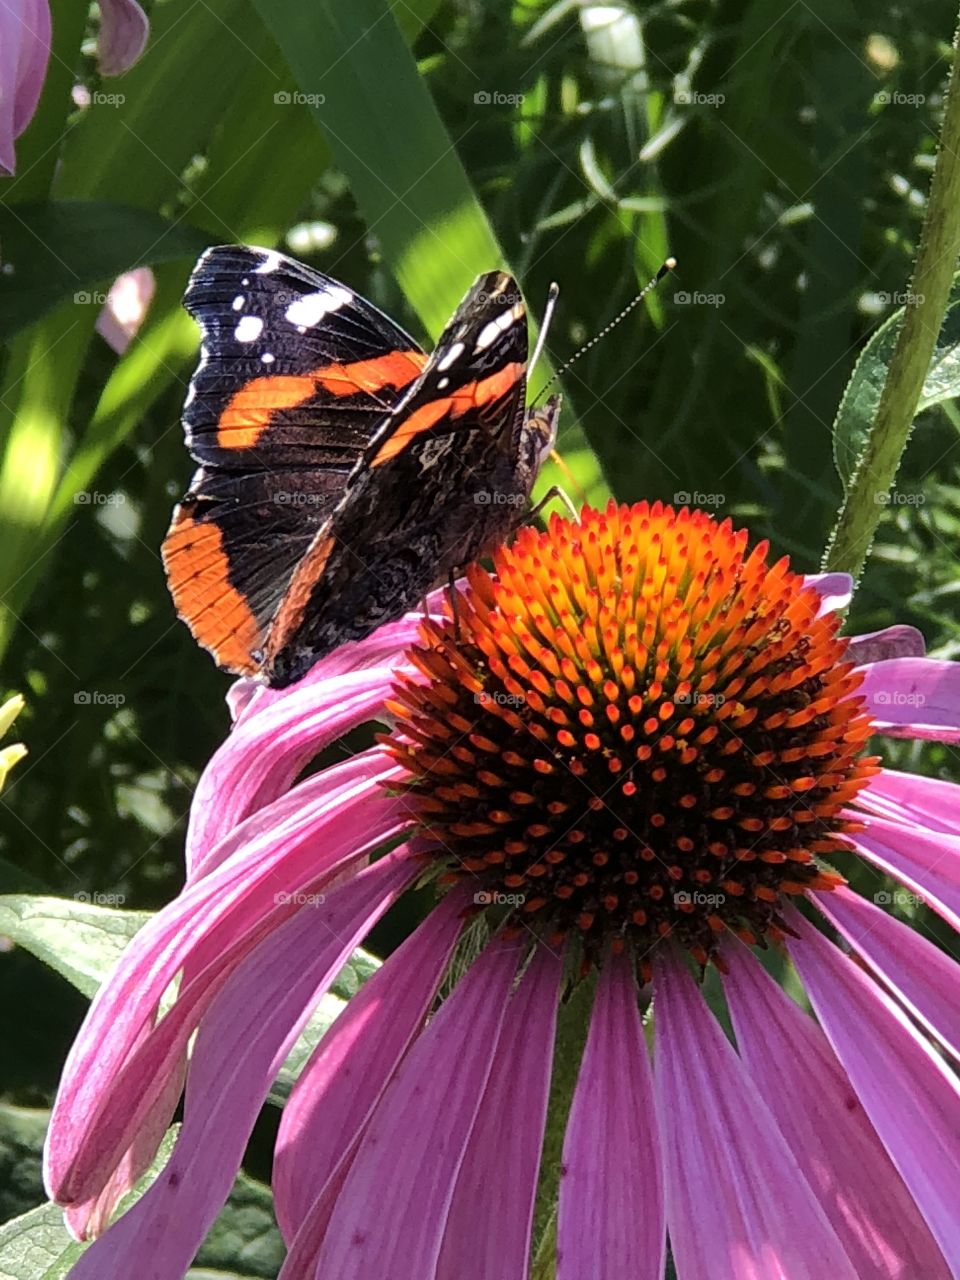 Wildflower, butterfly, and summer!